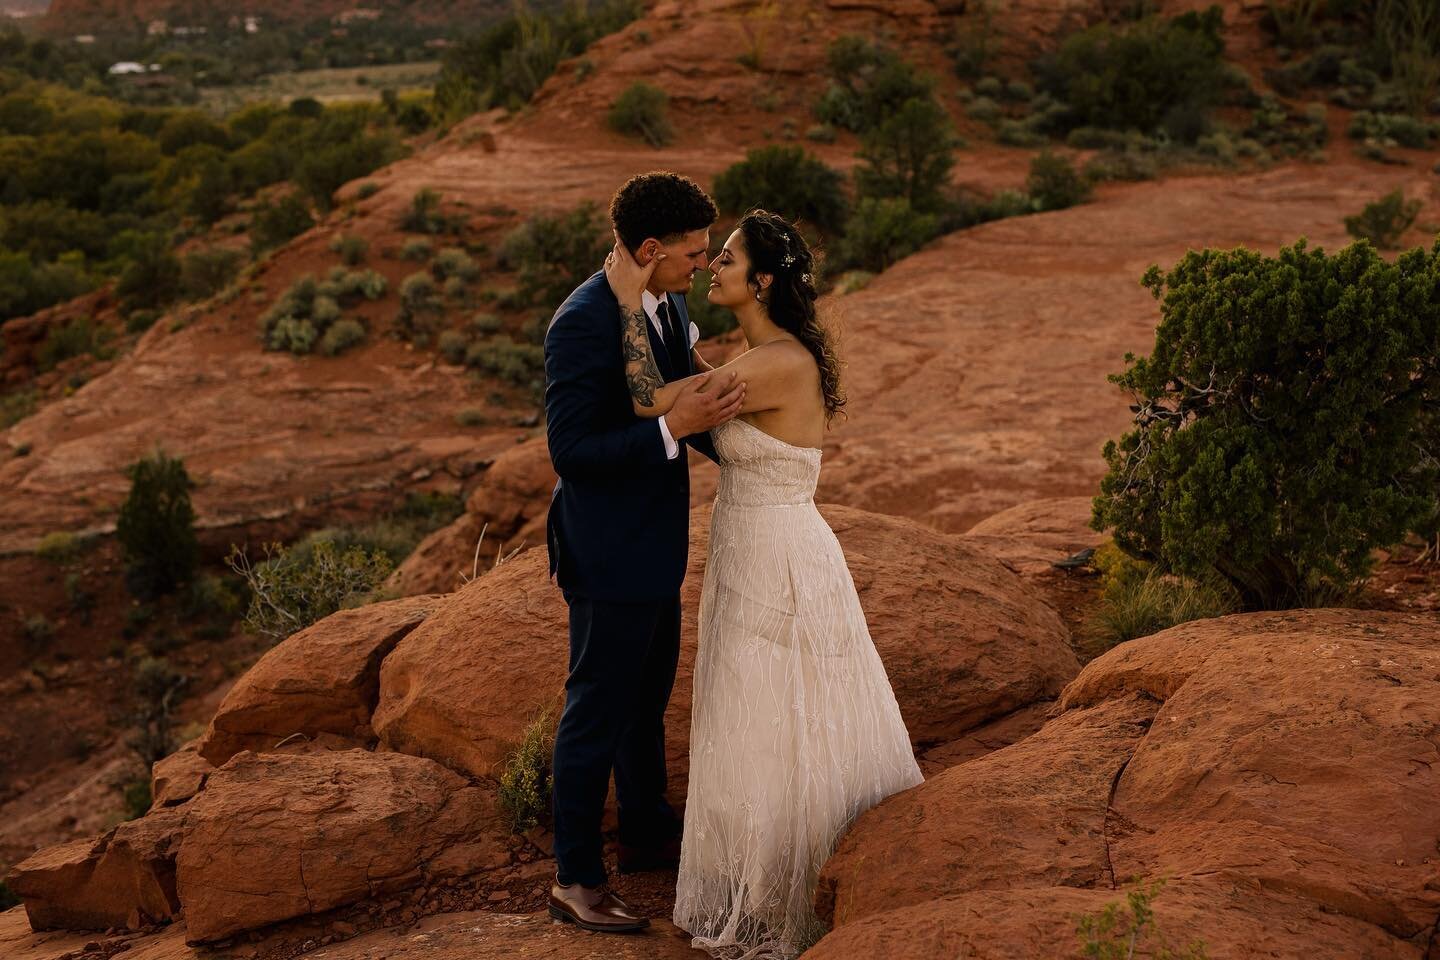 So grateful to work in the most beautiful industry in the most breathtaking landscapes #earthelopements #sedonaelopement #weddingphotographer #travelphoto #adventureelopements #wildhearts #earthportraits #grandcanyonweddingphotographer